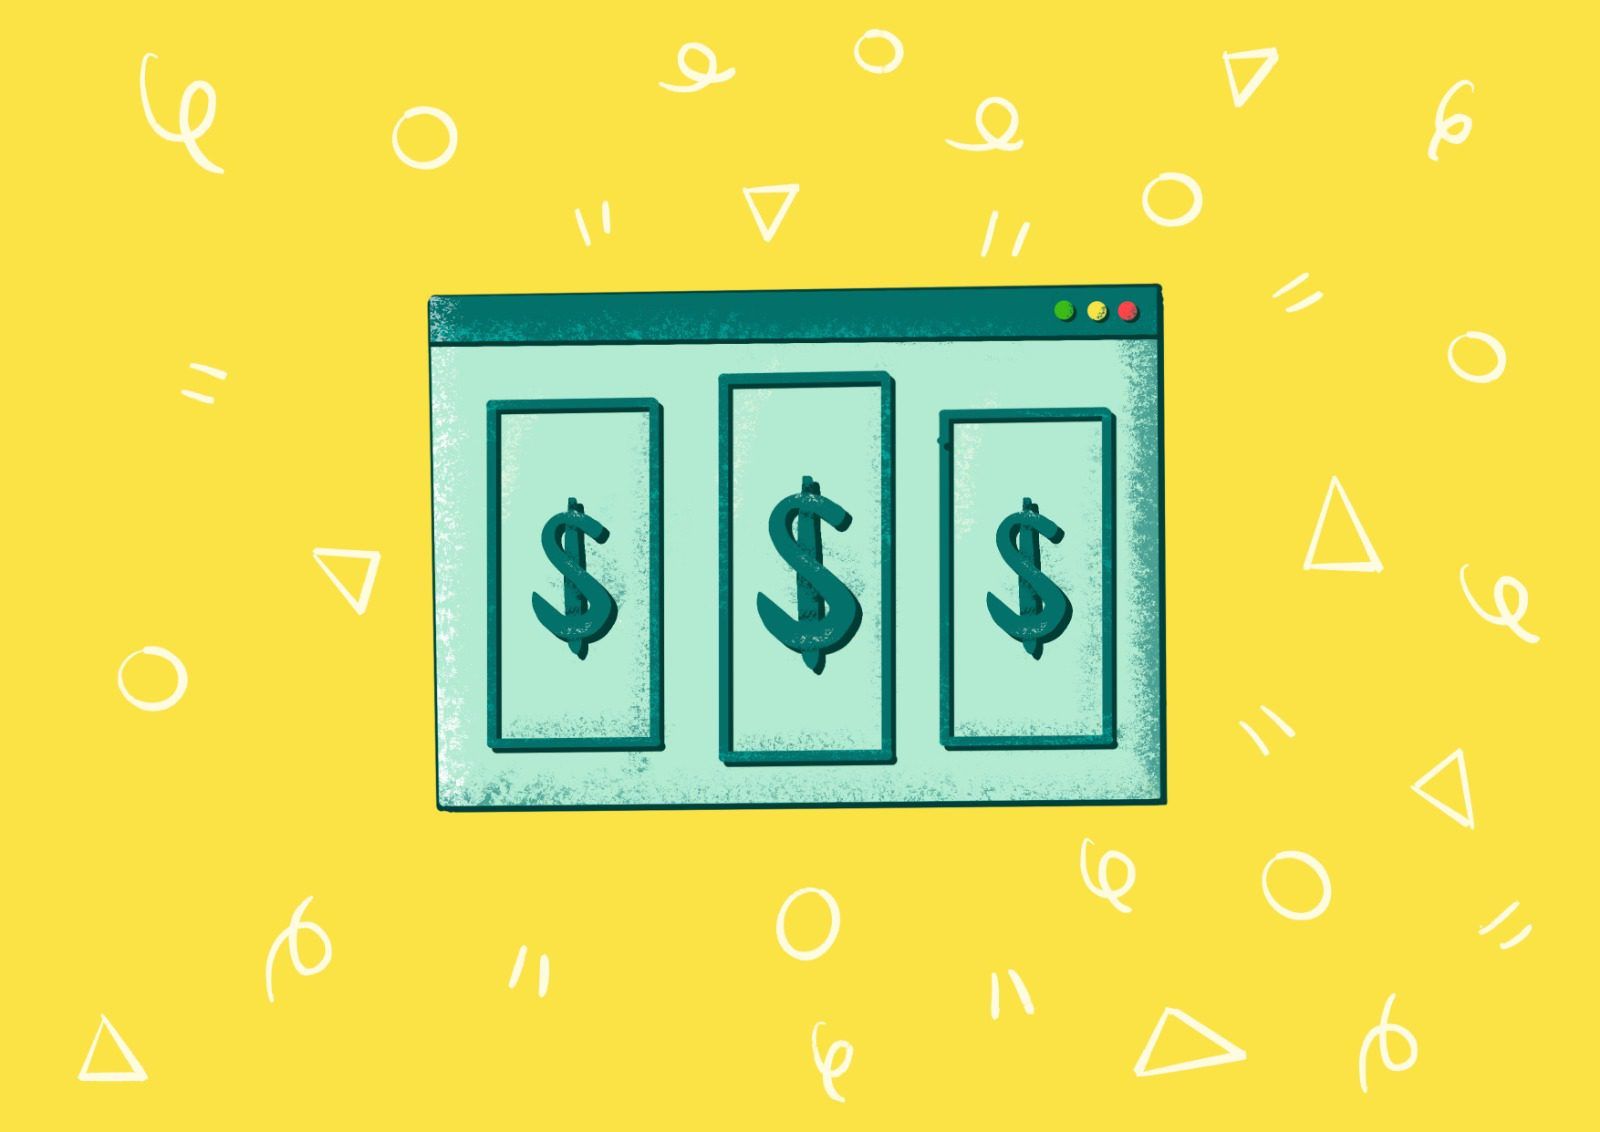 Illustration of a browser window made to look like dollar money